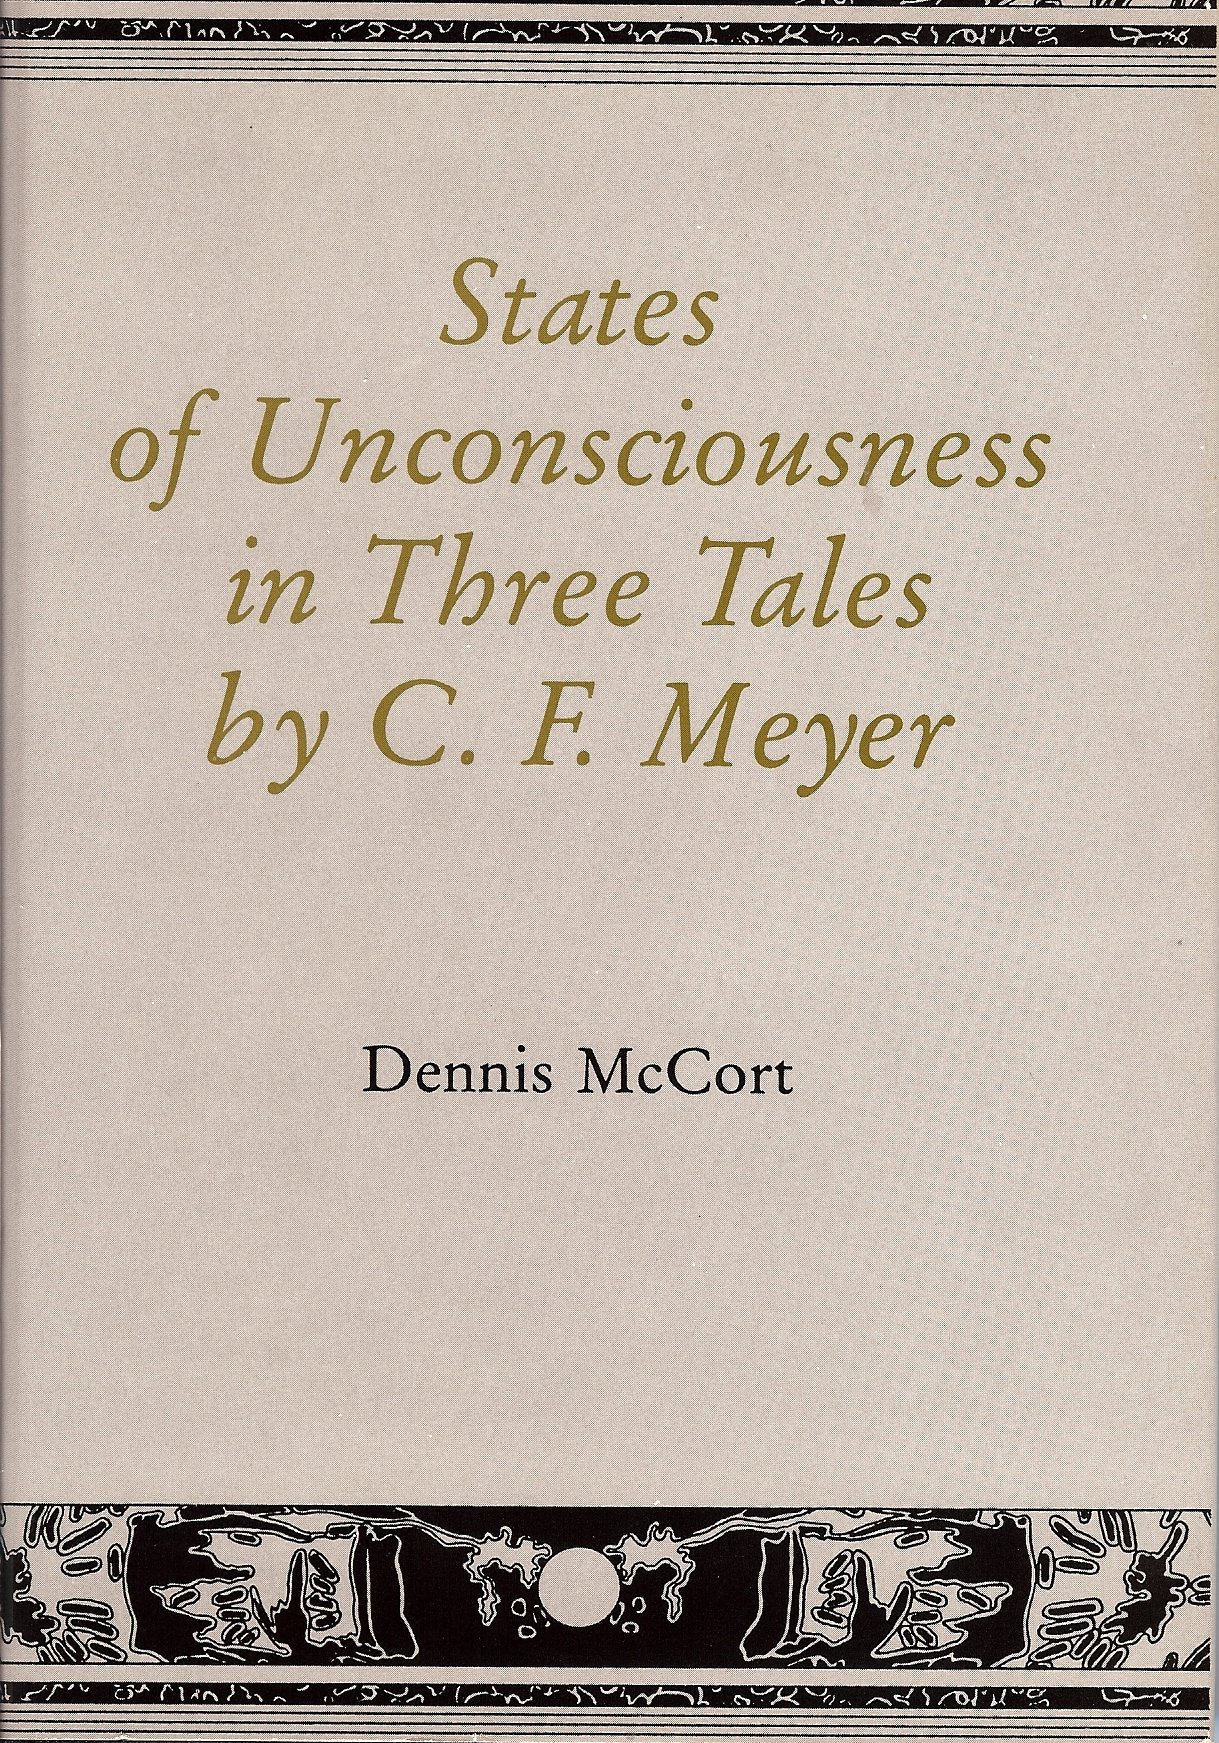 States of Unconsciousness in Three Tales by C.F. Meyer